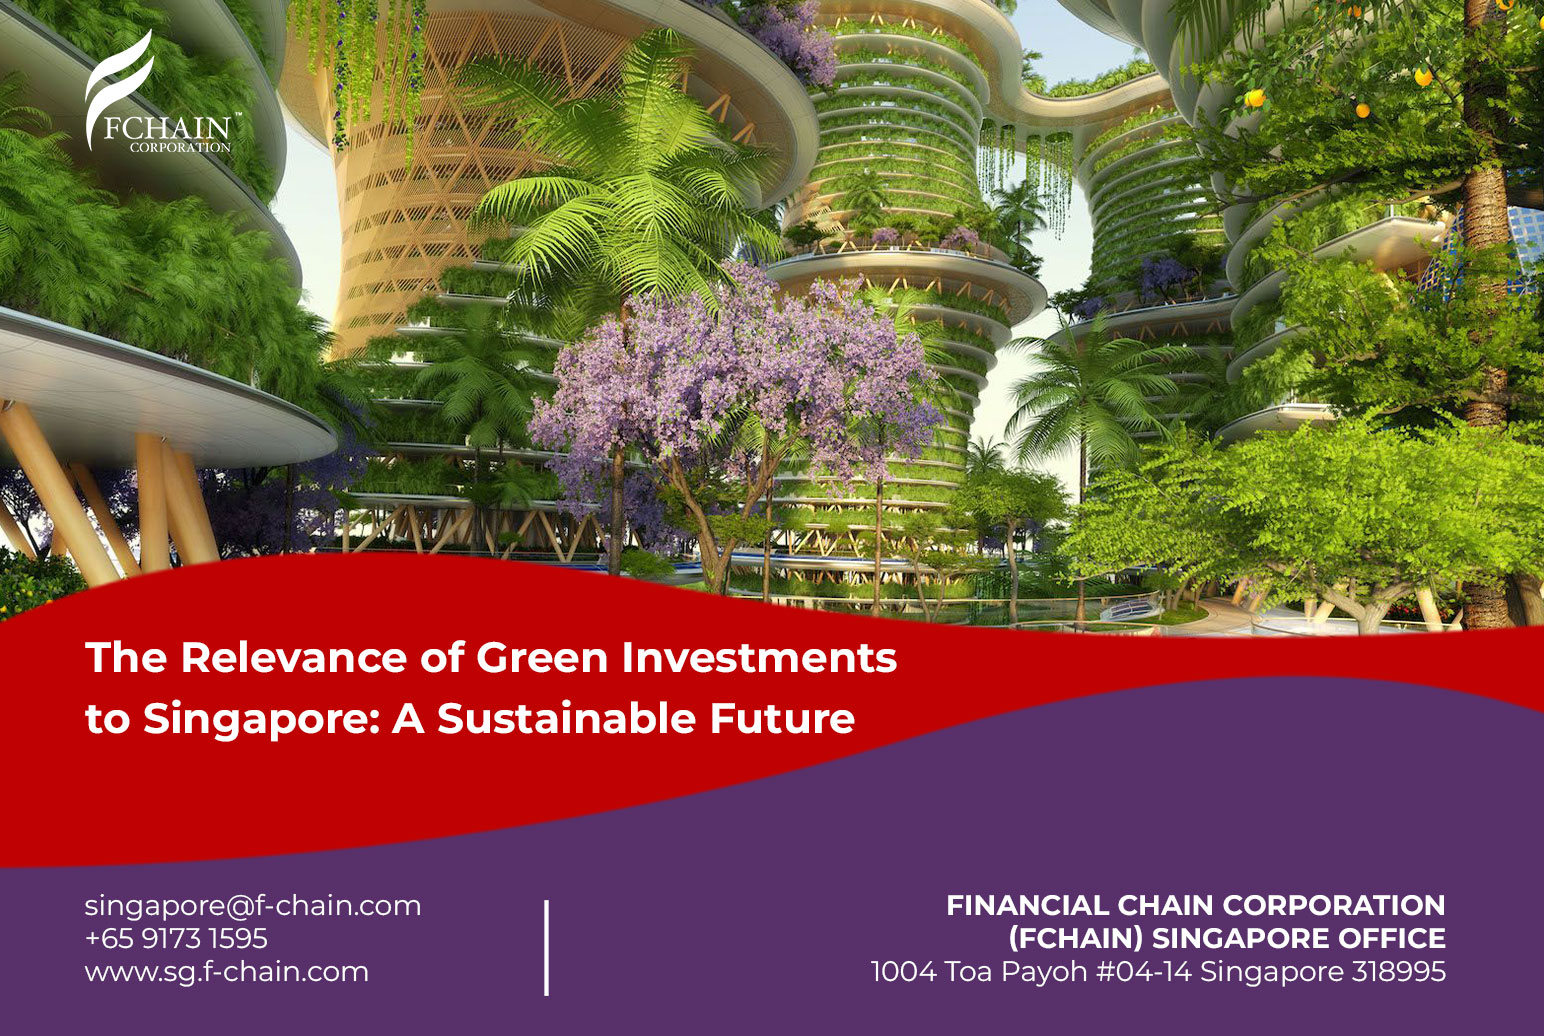 The Relevance of Green Investments to Singapore: A Sustainable Future